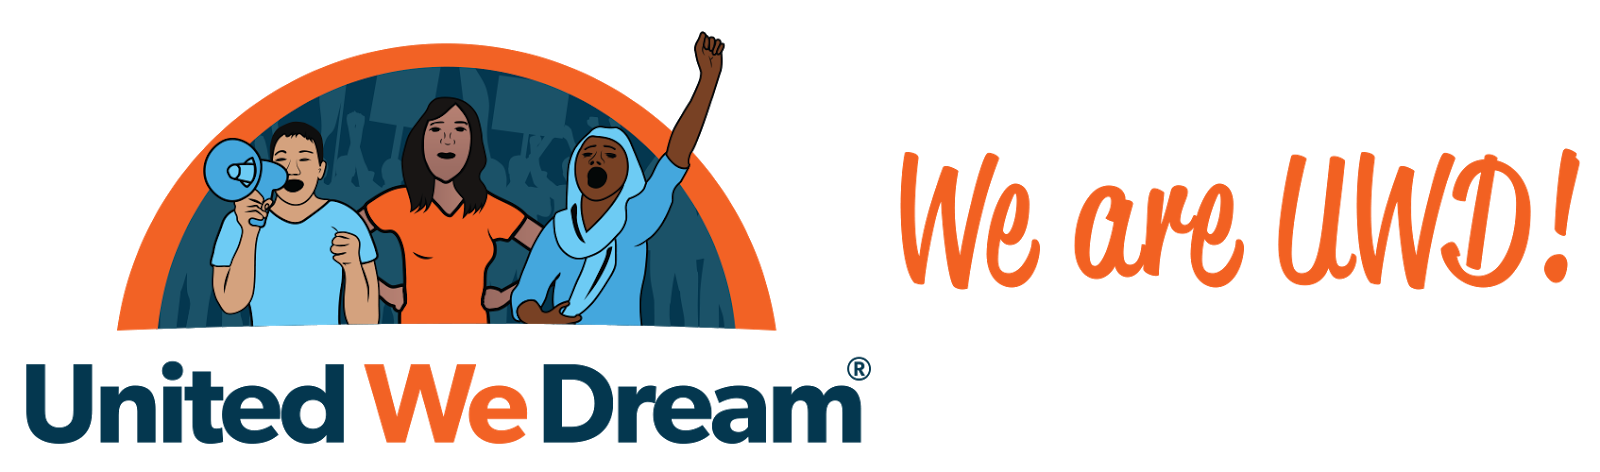 immigration clipart dreamers